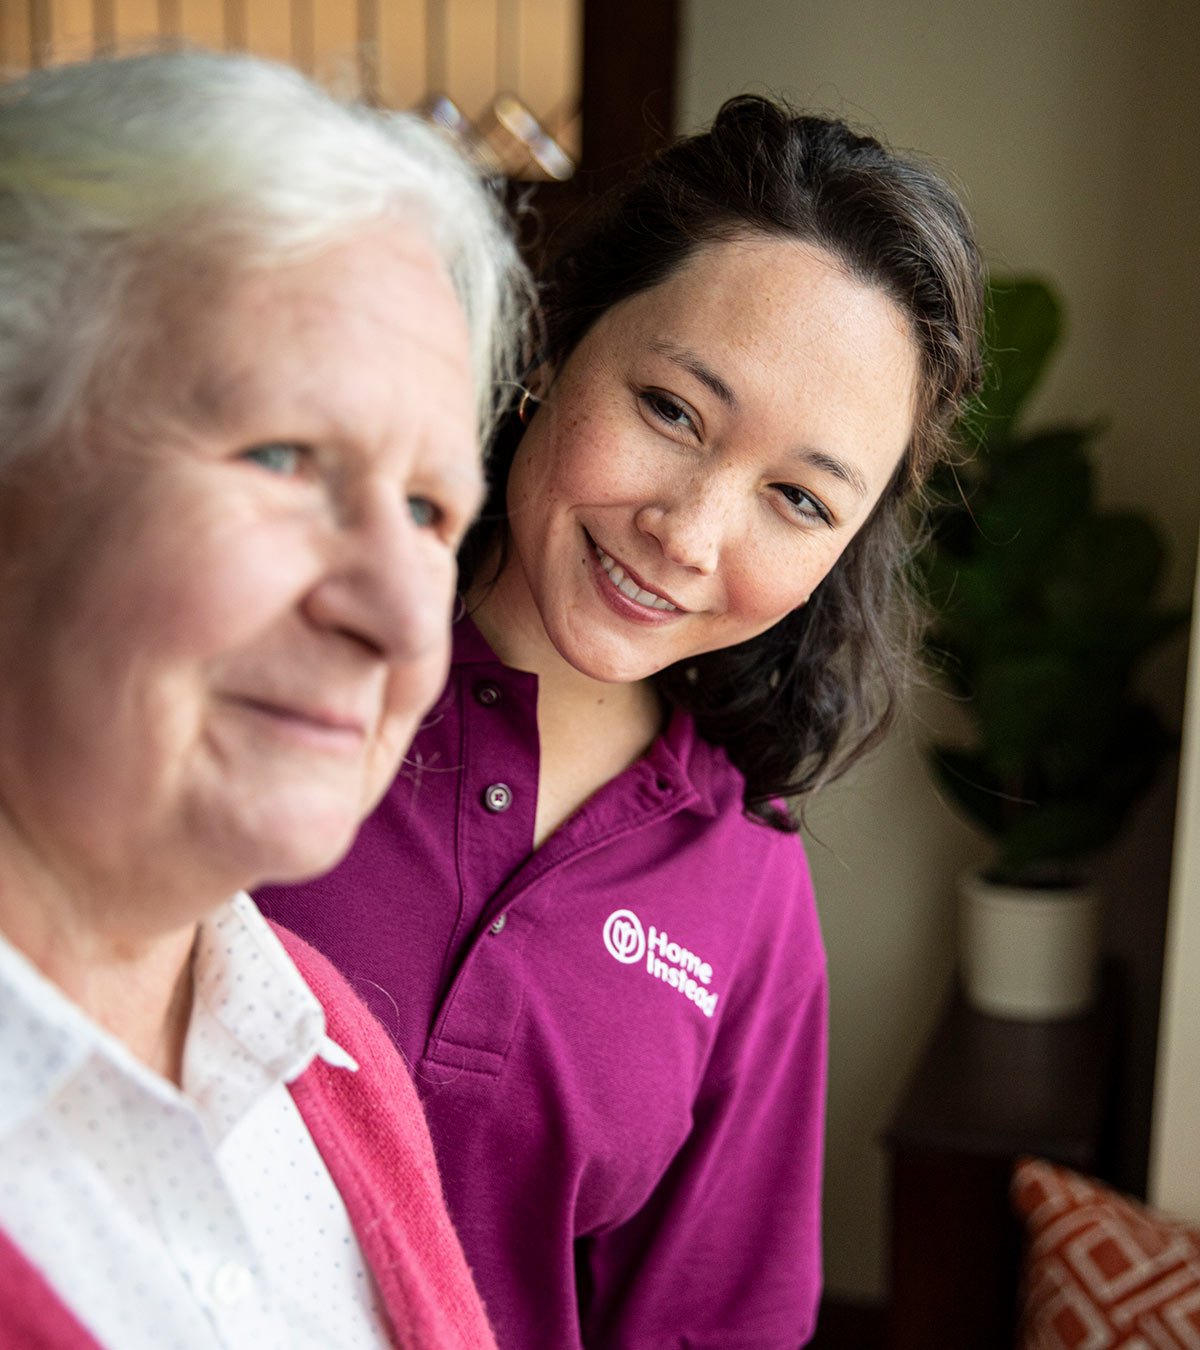 Home Instead CAREGiver smiling and looking at senior performing elder care